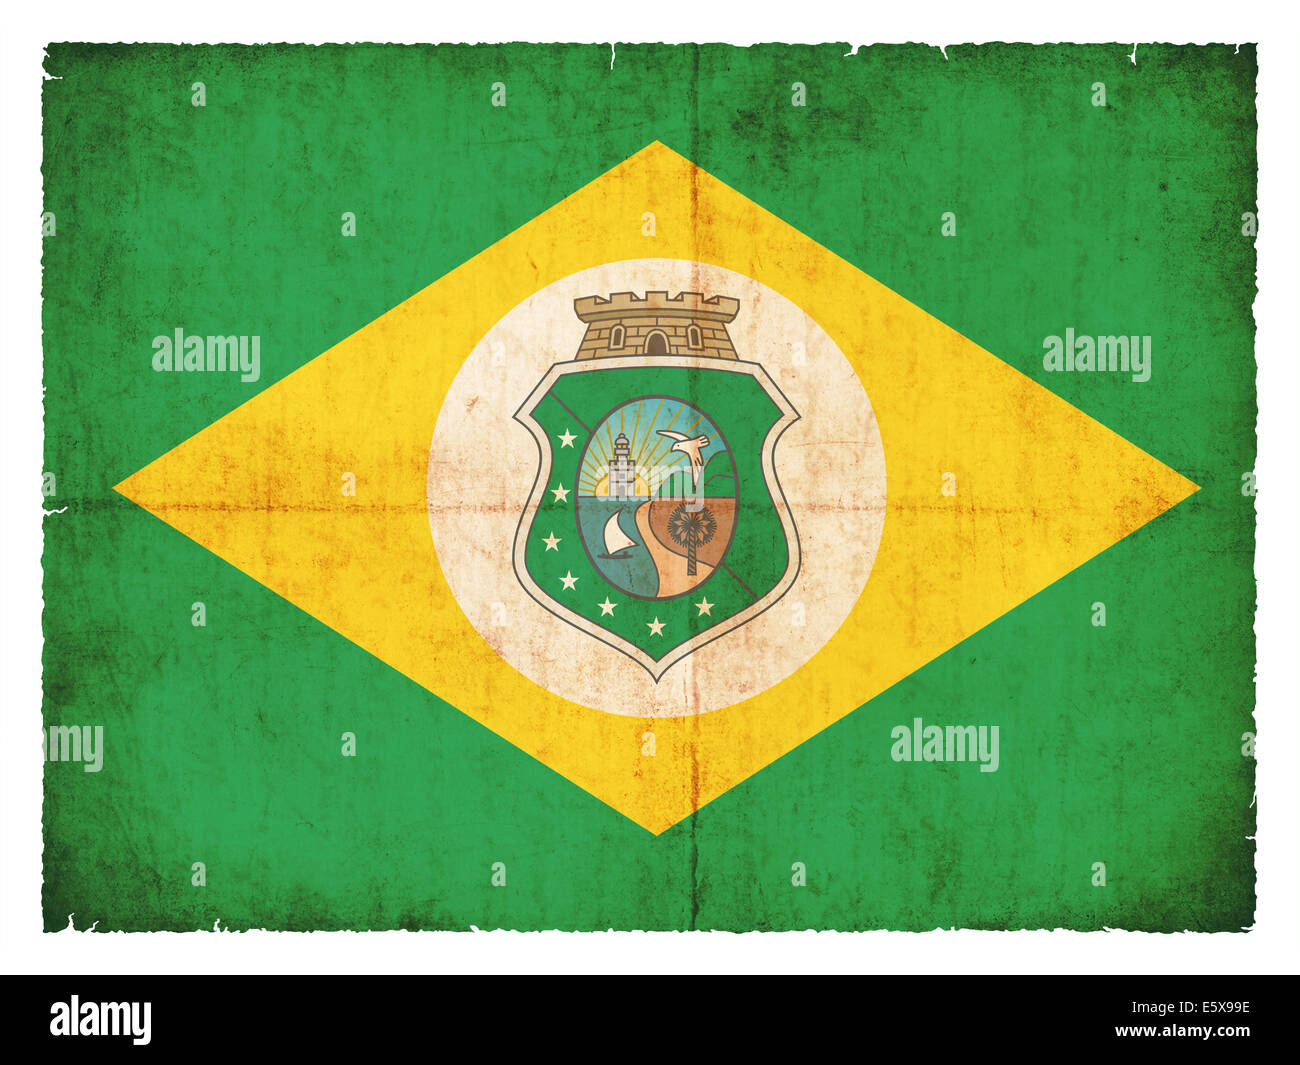 Flag of the Brazilian state Ceara created in grunge style Stock Photo